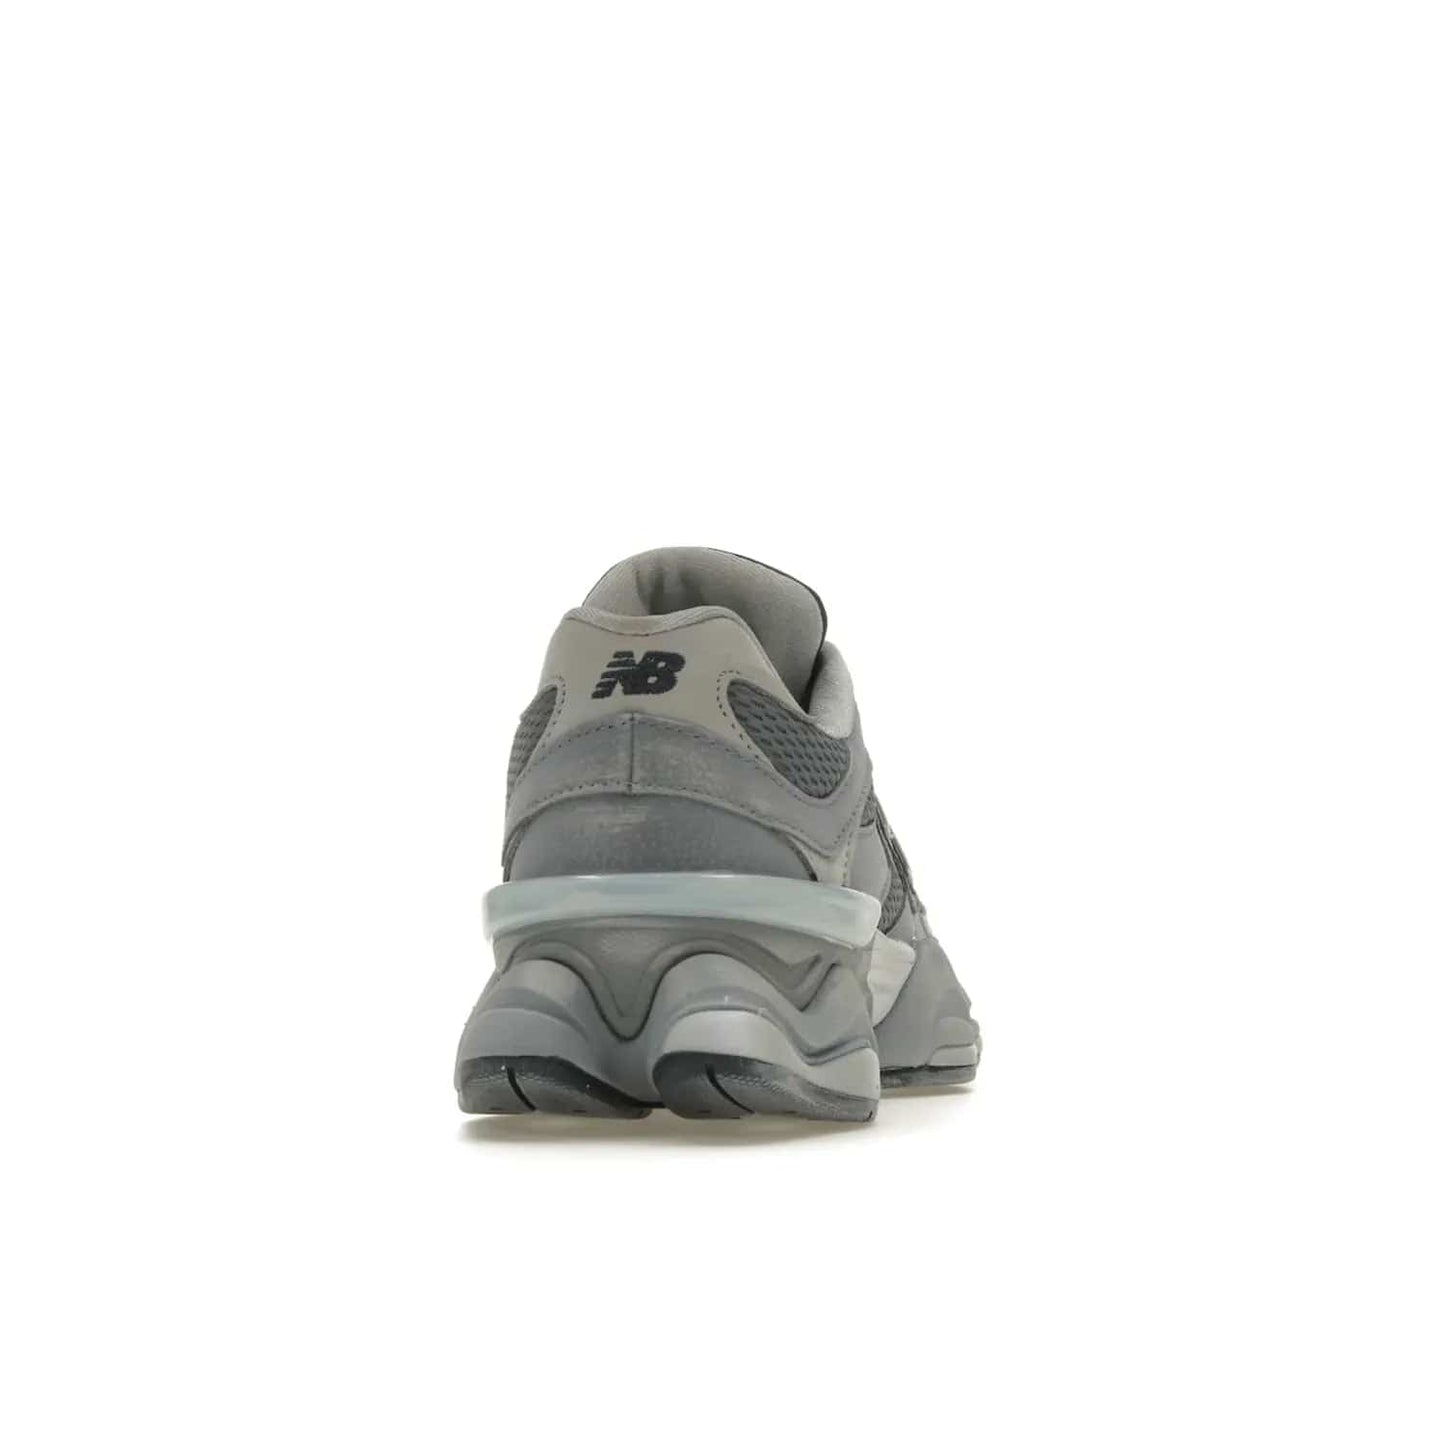 New Balance 9060 Grey Day (2023) - Image 29 - Only at www.BallersClubKickz.com - #
Sporty-meets-stylish in the New Balance 9060 Grey Day sneaker. Designed with Arctic Grey, Steel, and Silver Metallic, it offers an edgy but wearable look along with classic NB comfort and quality.